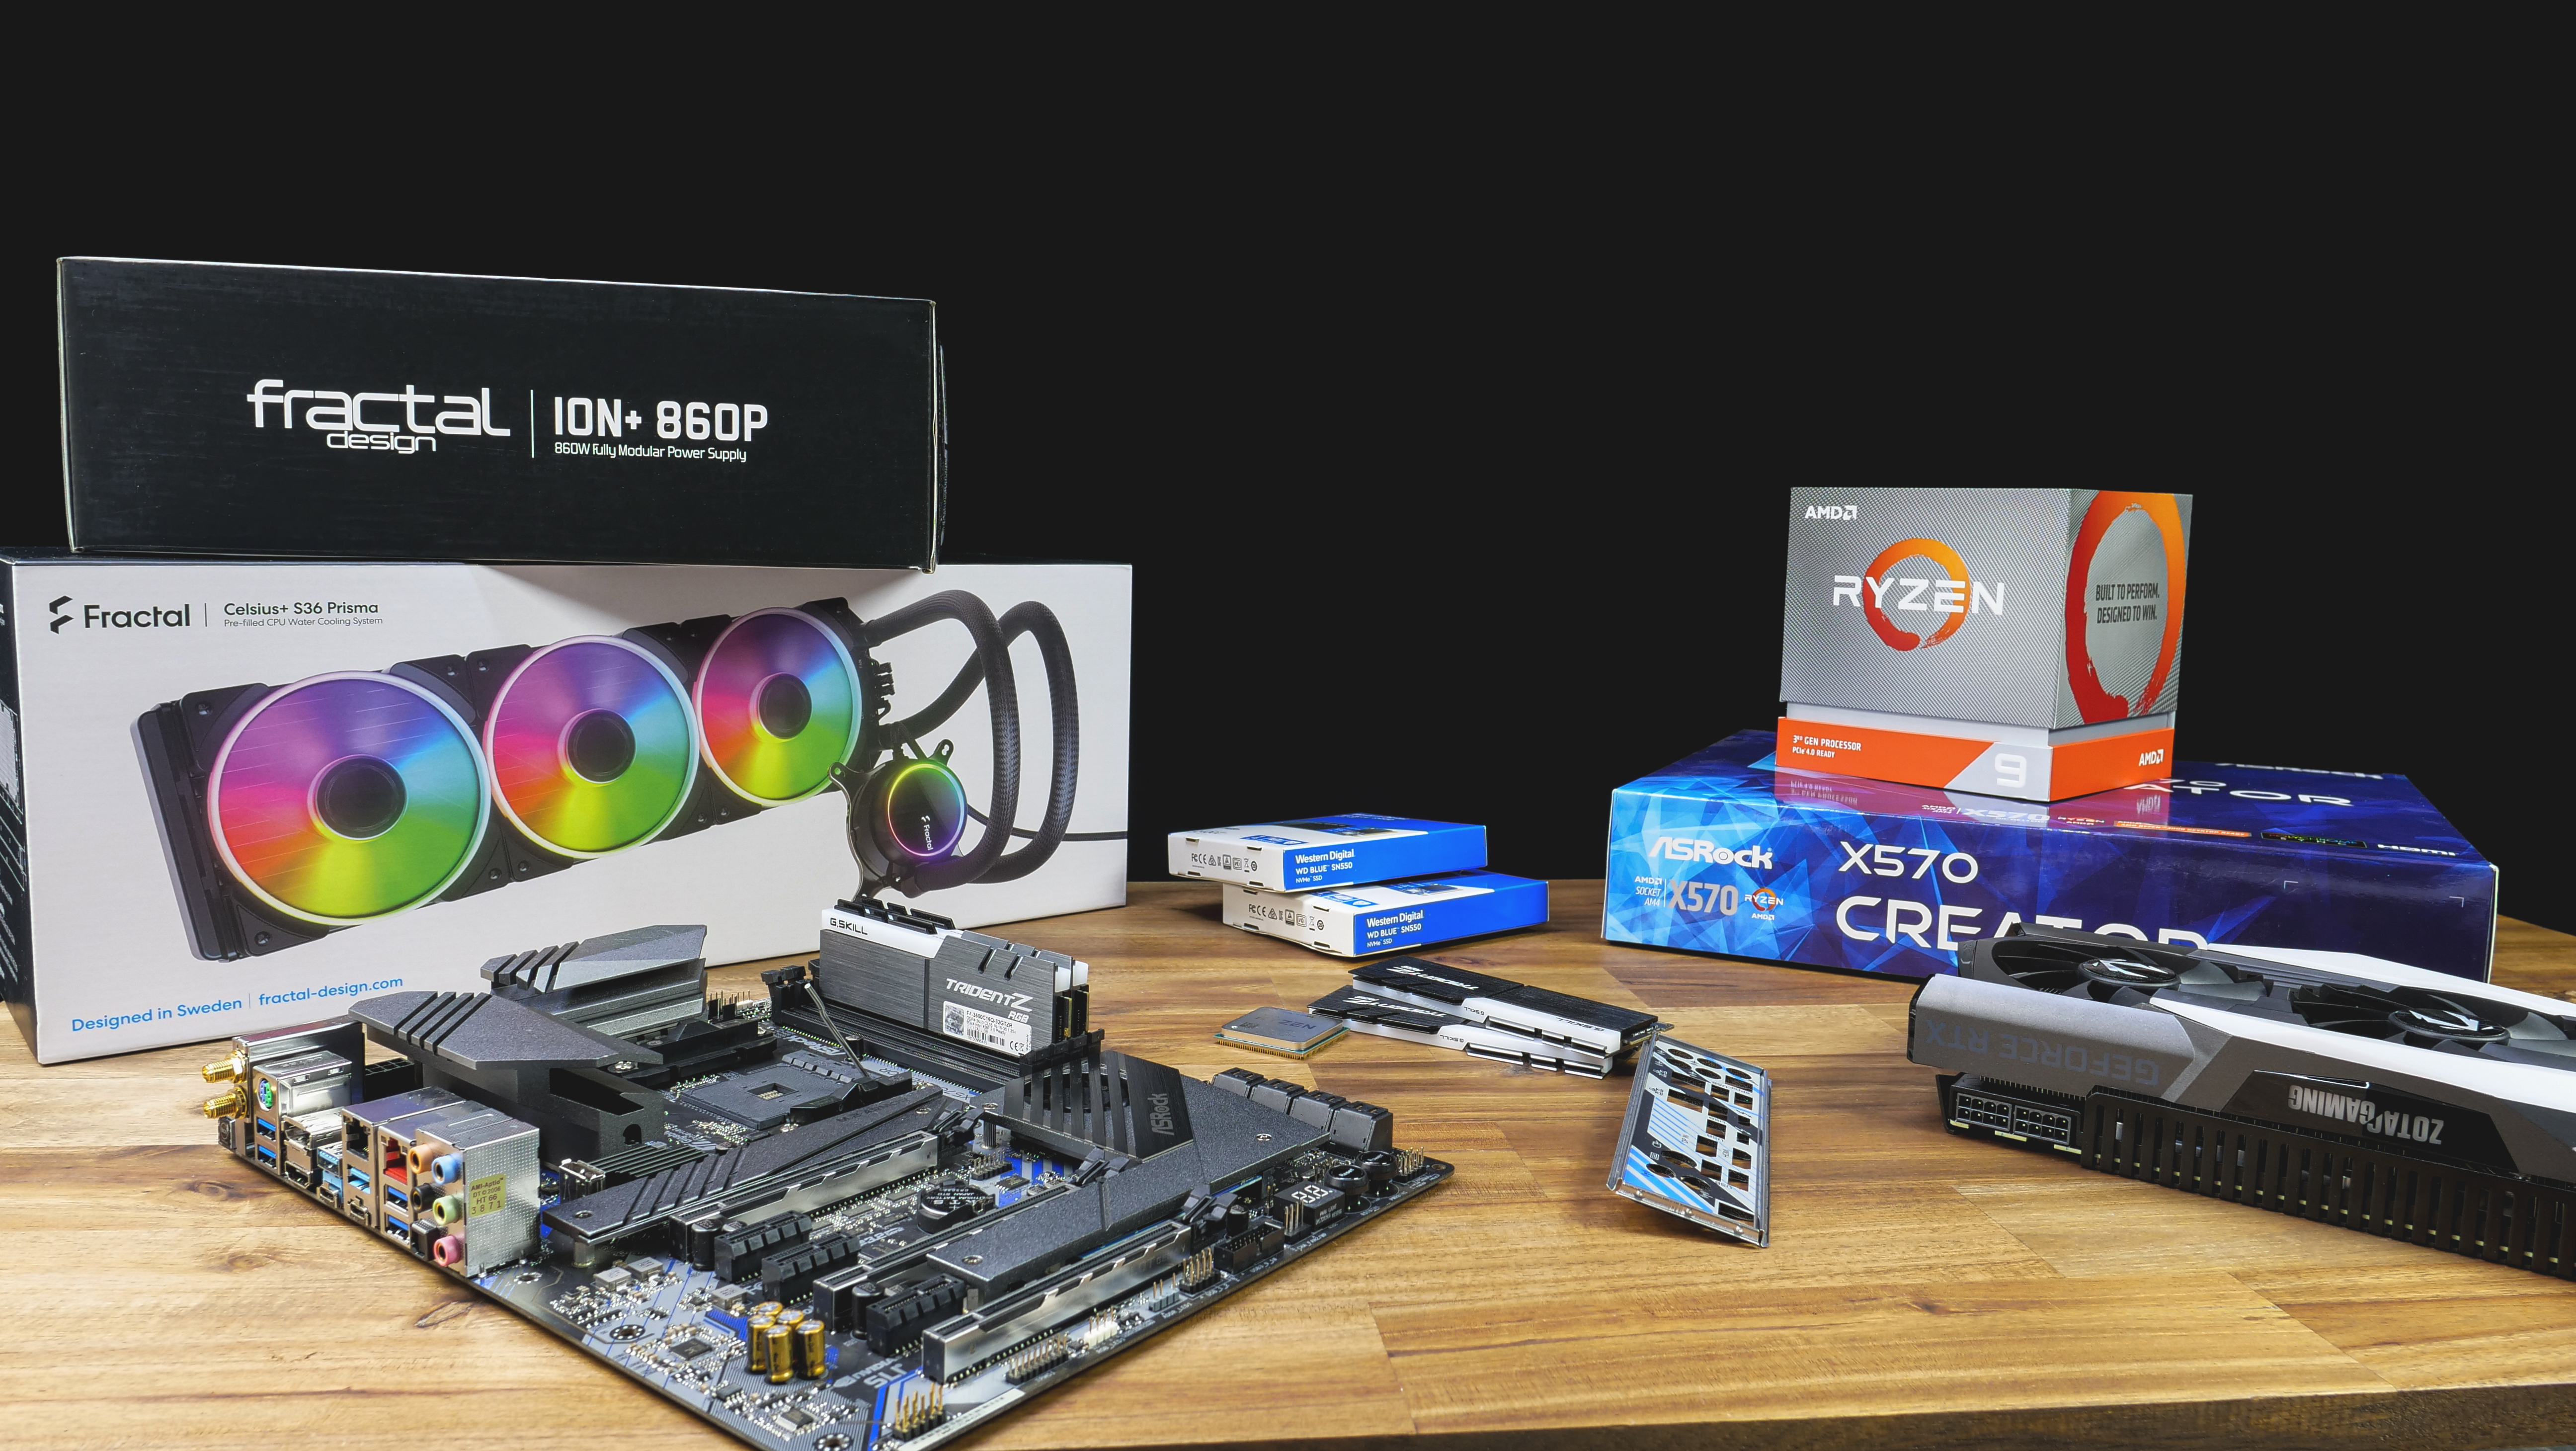 What a fine collection of supreme PC parts - all built into a truly beautiful PC that's ready for anything.